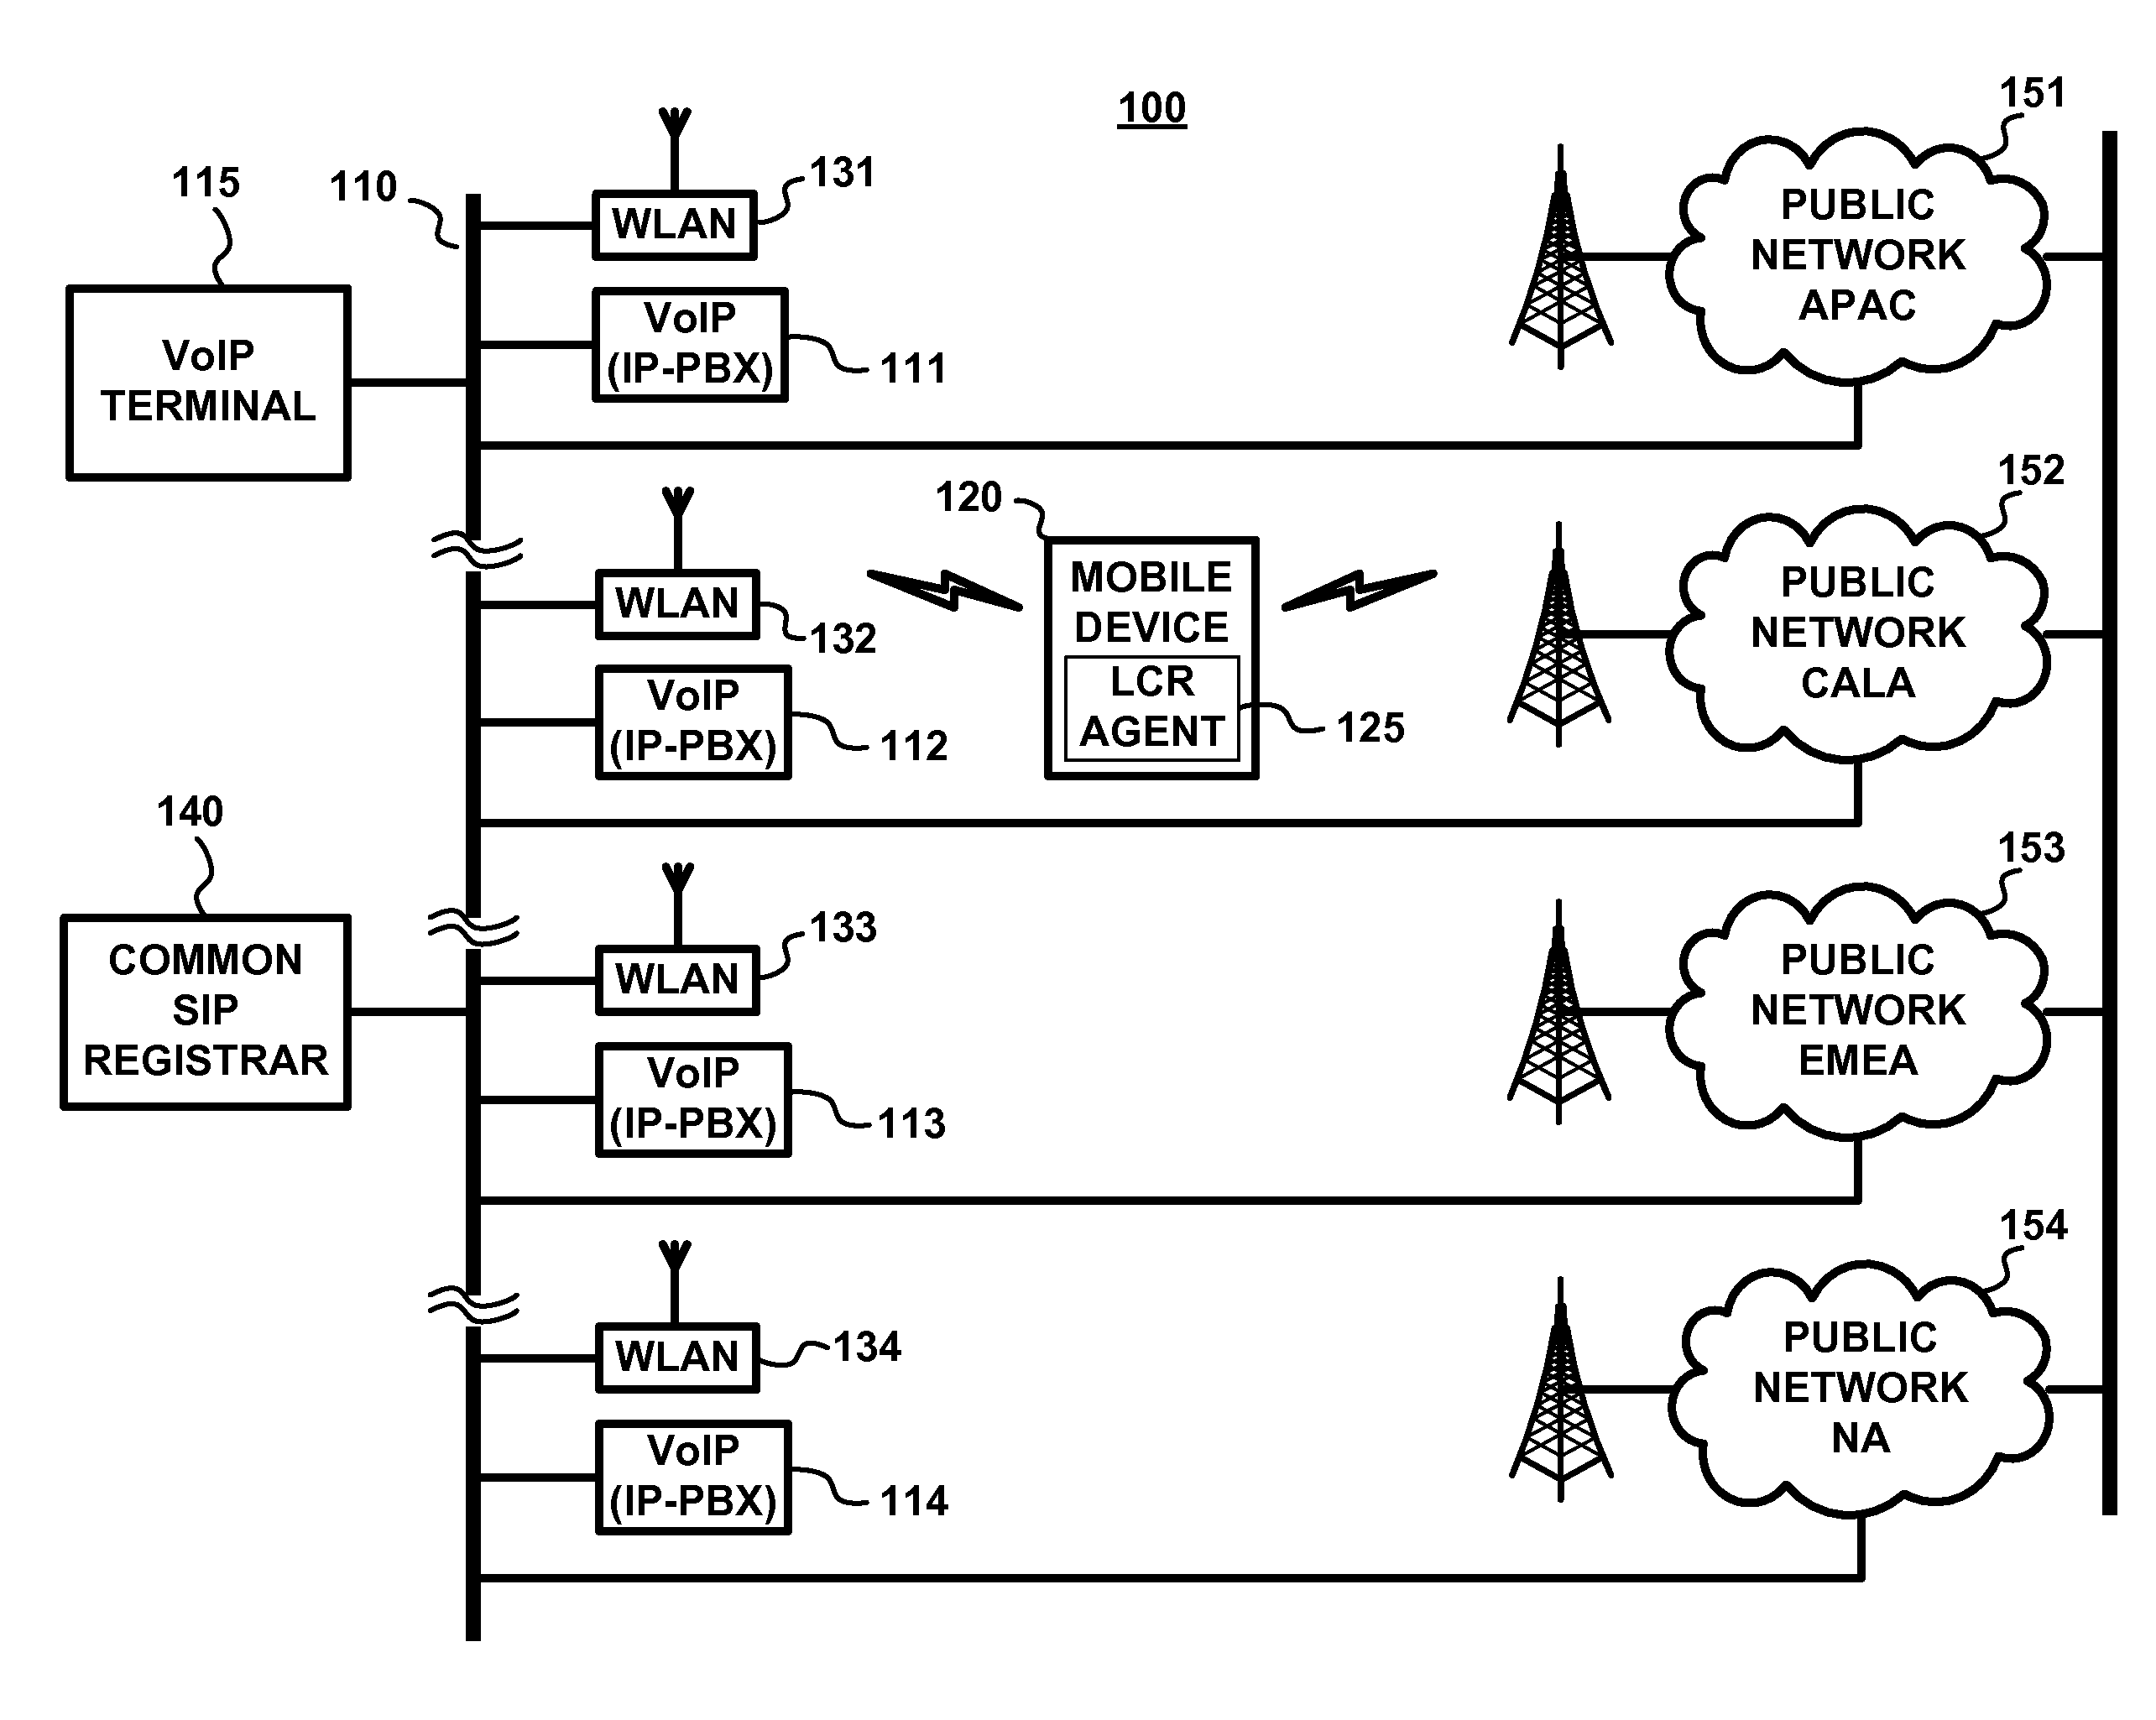 System and method for providing least-cost routing of voice connections between home and foreign networks using voice-over-IP infrastructure